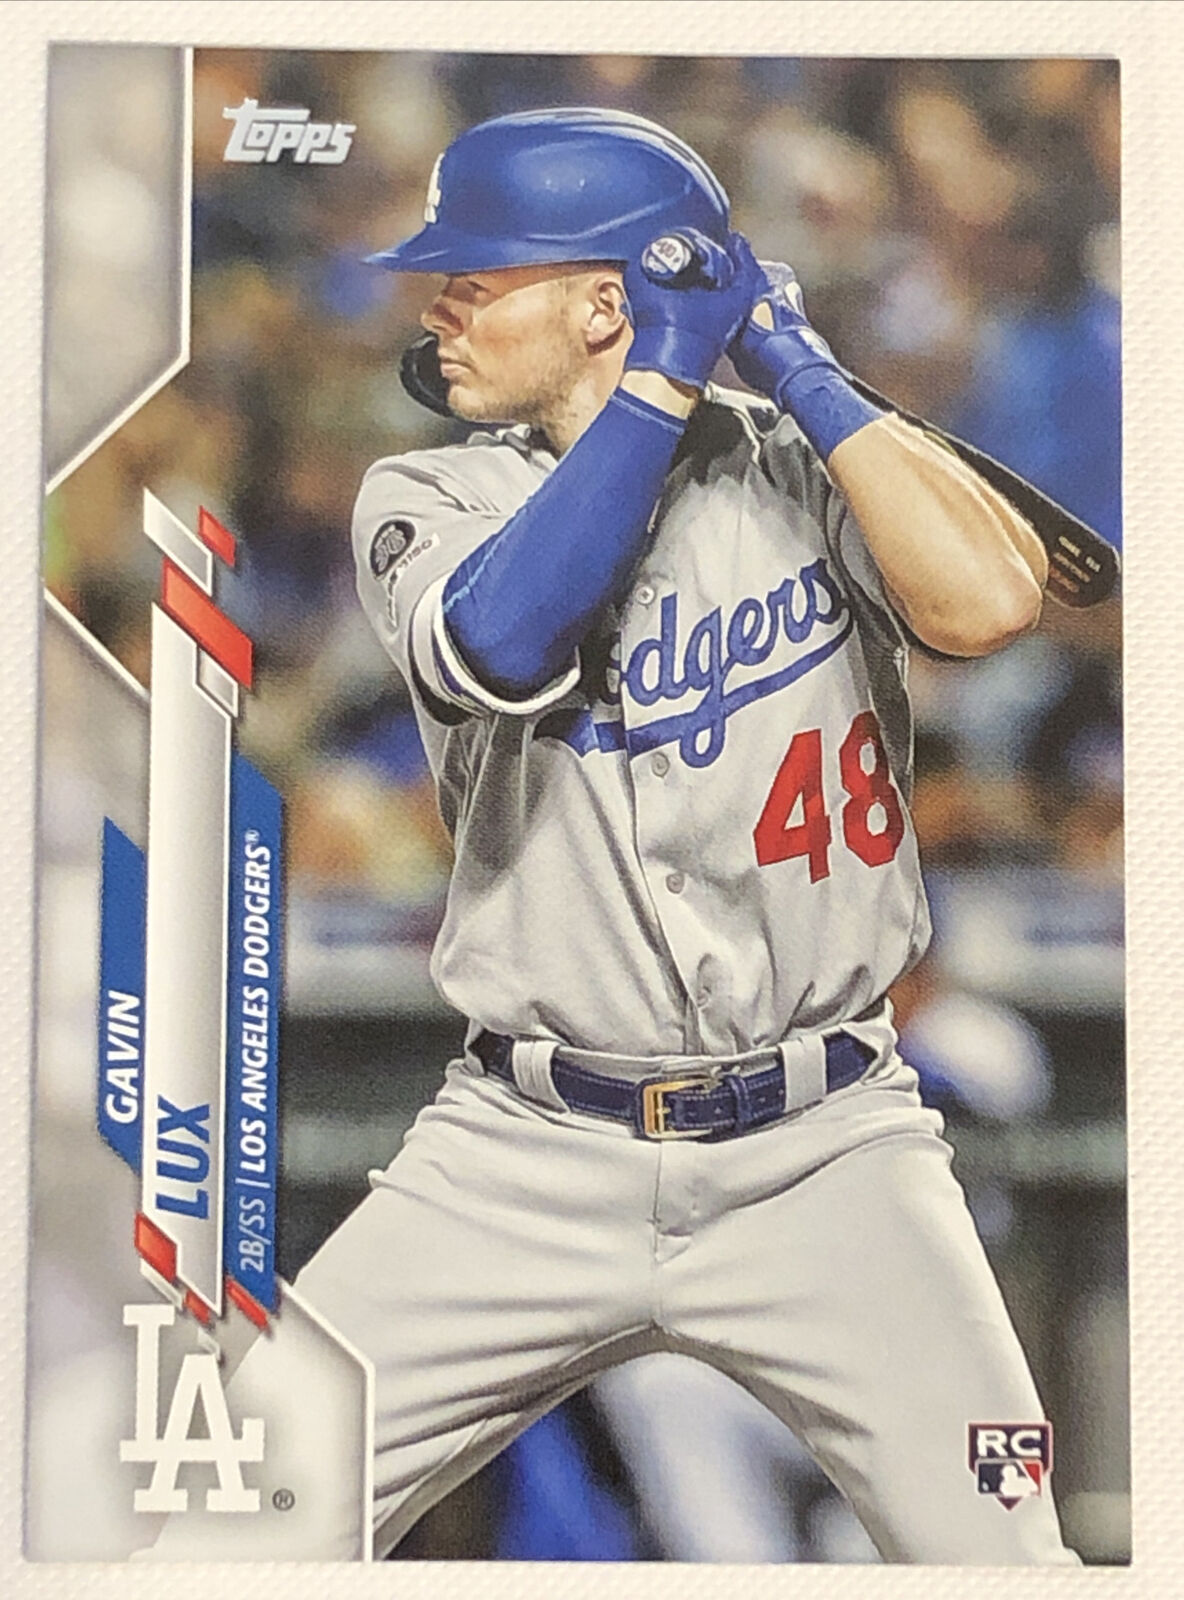 Gavin Lux 2020 Topps Series One Photo Variation RC DODGERS - All